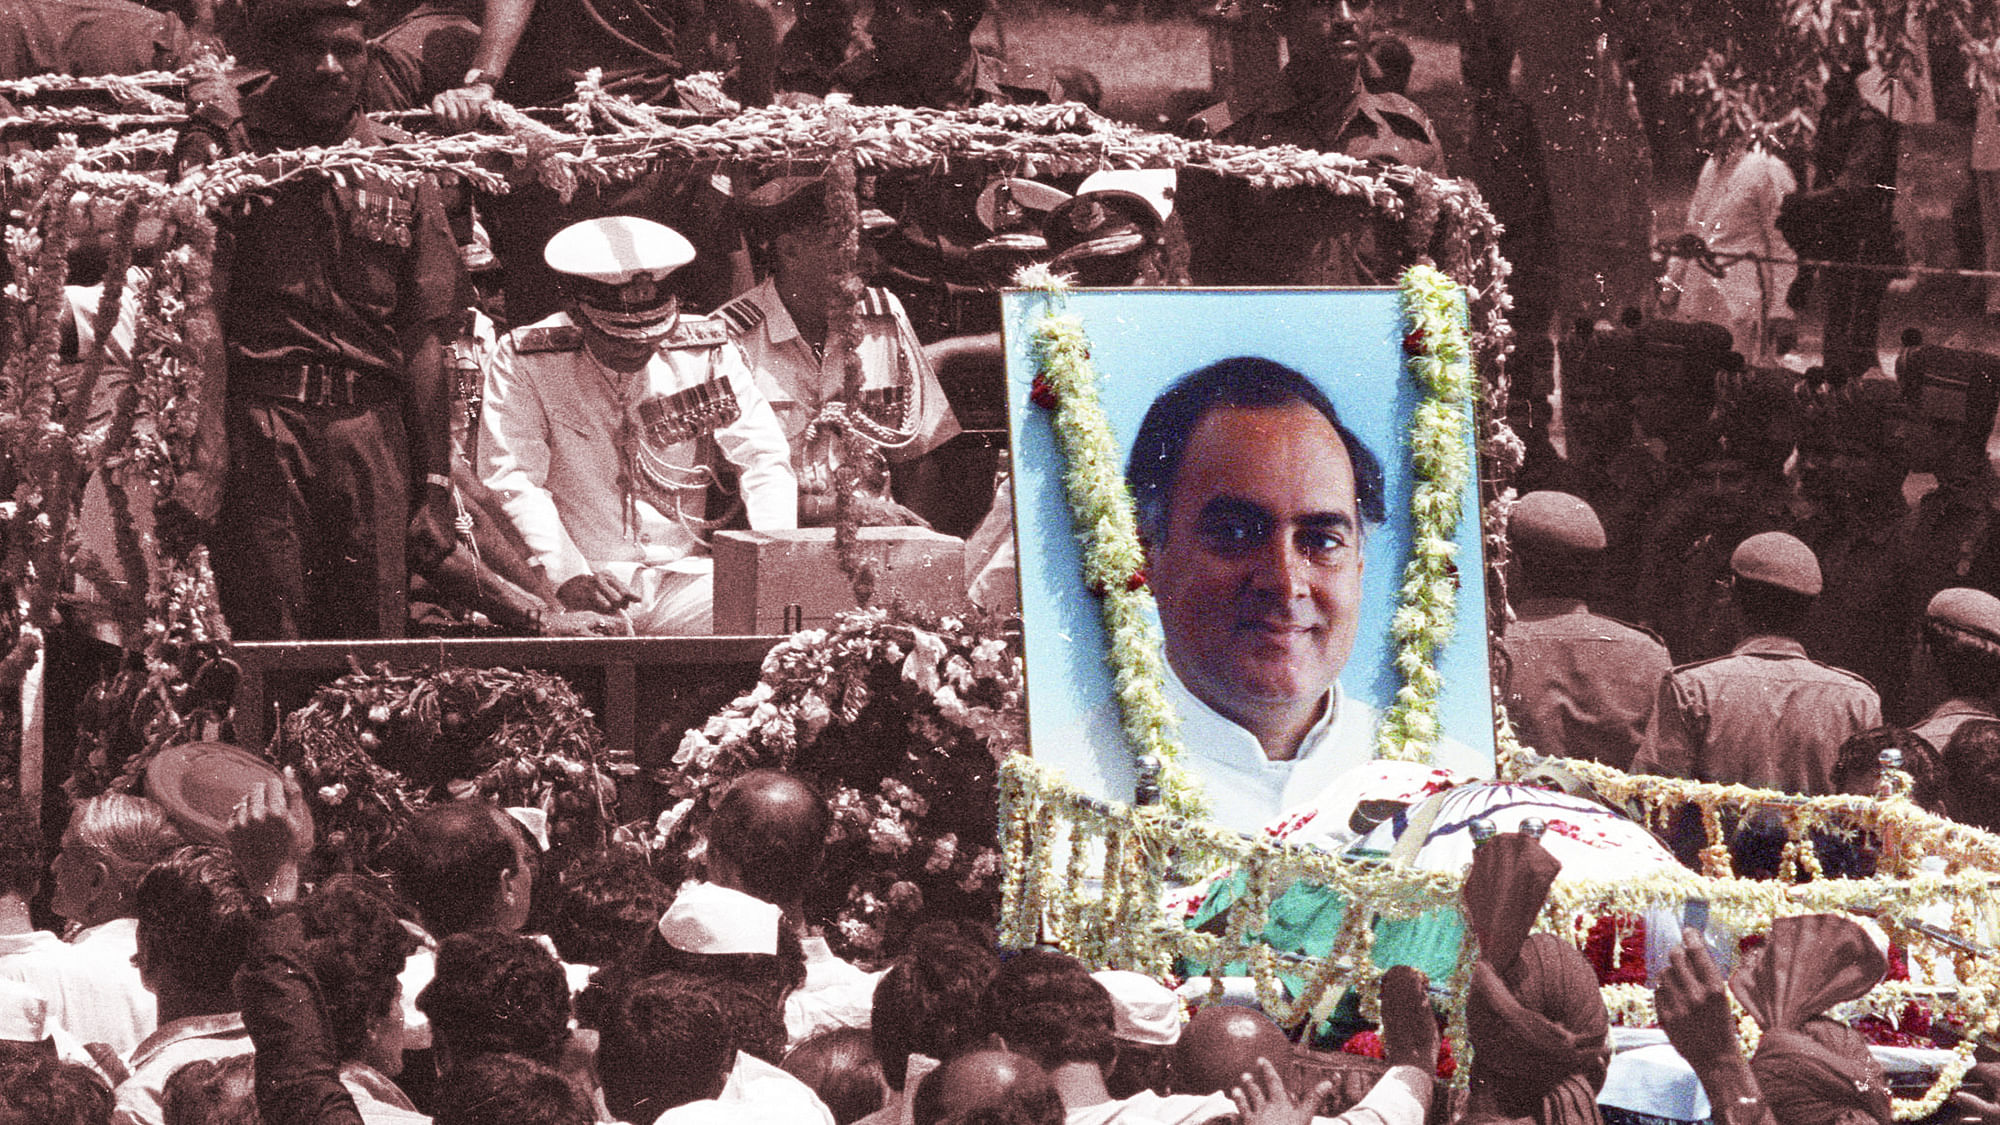 Rajiv Gandhi assassination case convict AG Perarivalan attacked inside  Vellore prison. (Photo: Altered by <b>The Quint</b>)